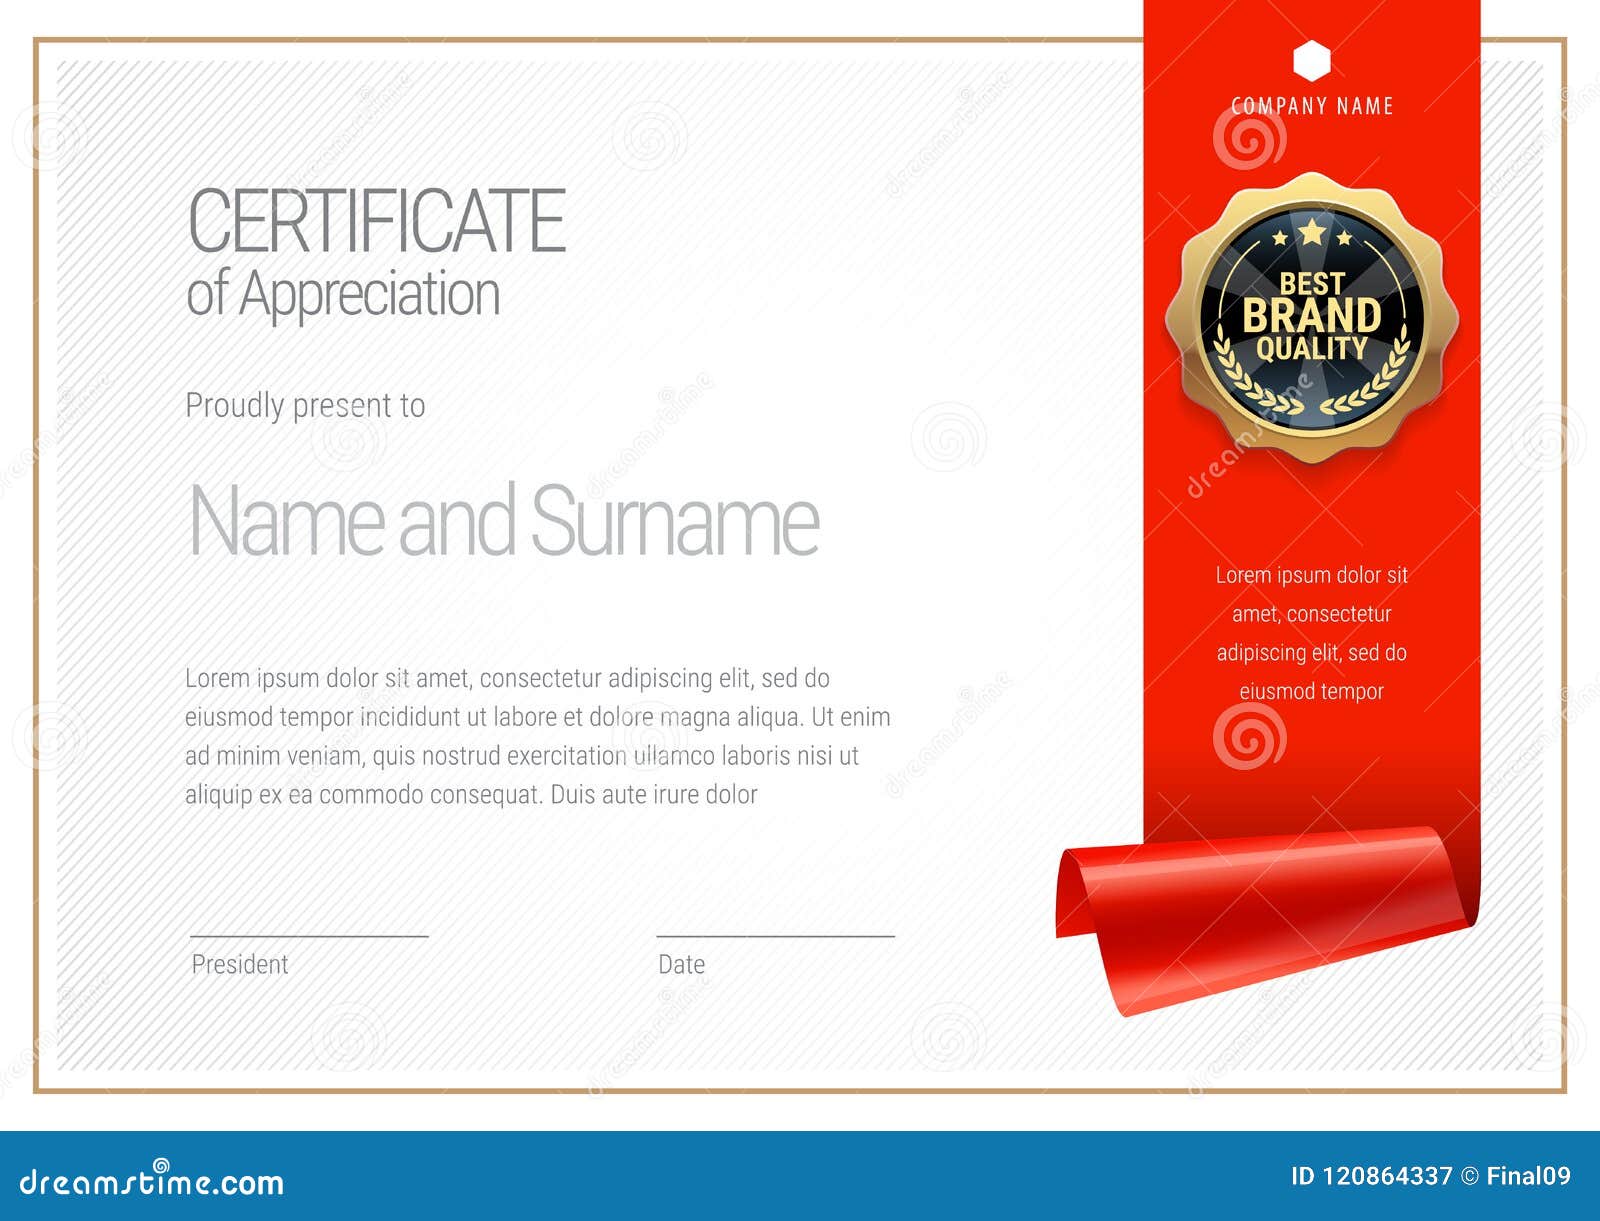 Certificate Template. Diploma of Modern Design or Gift Certificate Regarding Company Gift Certificate Template